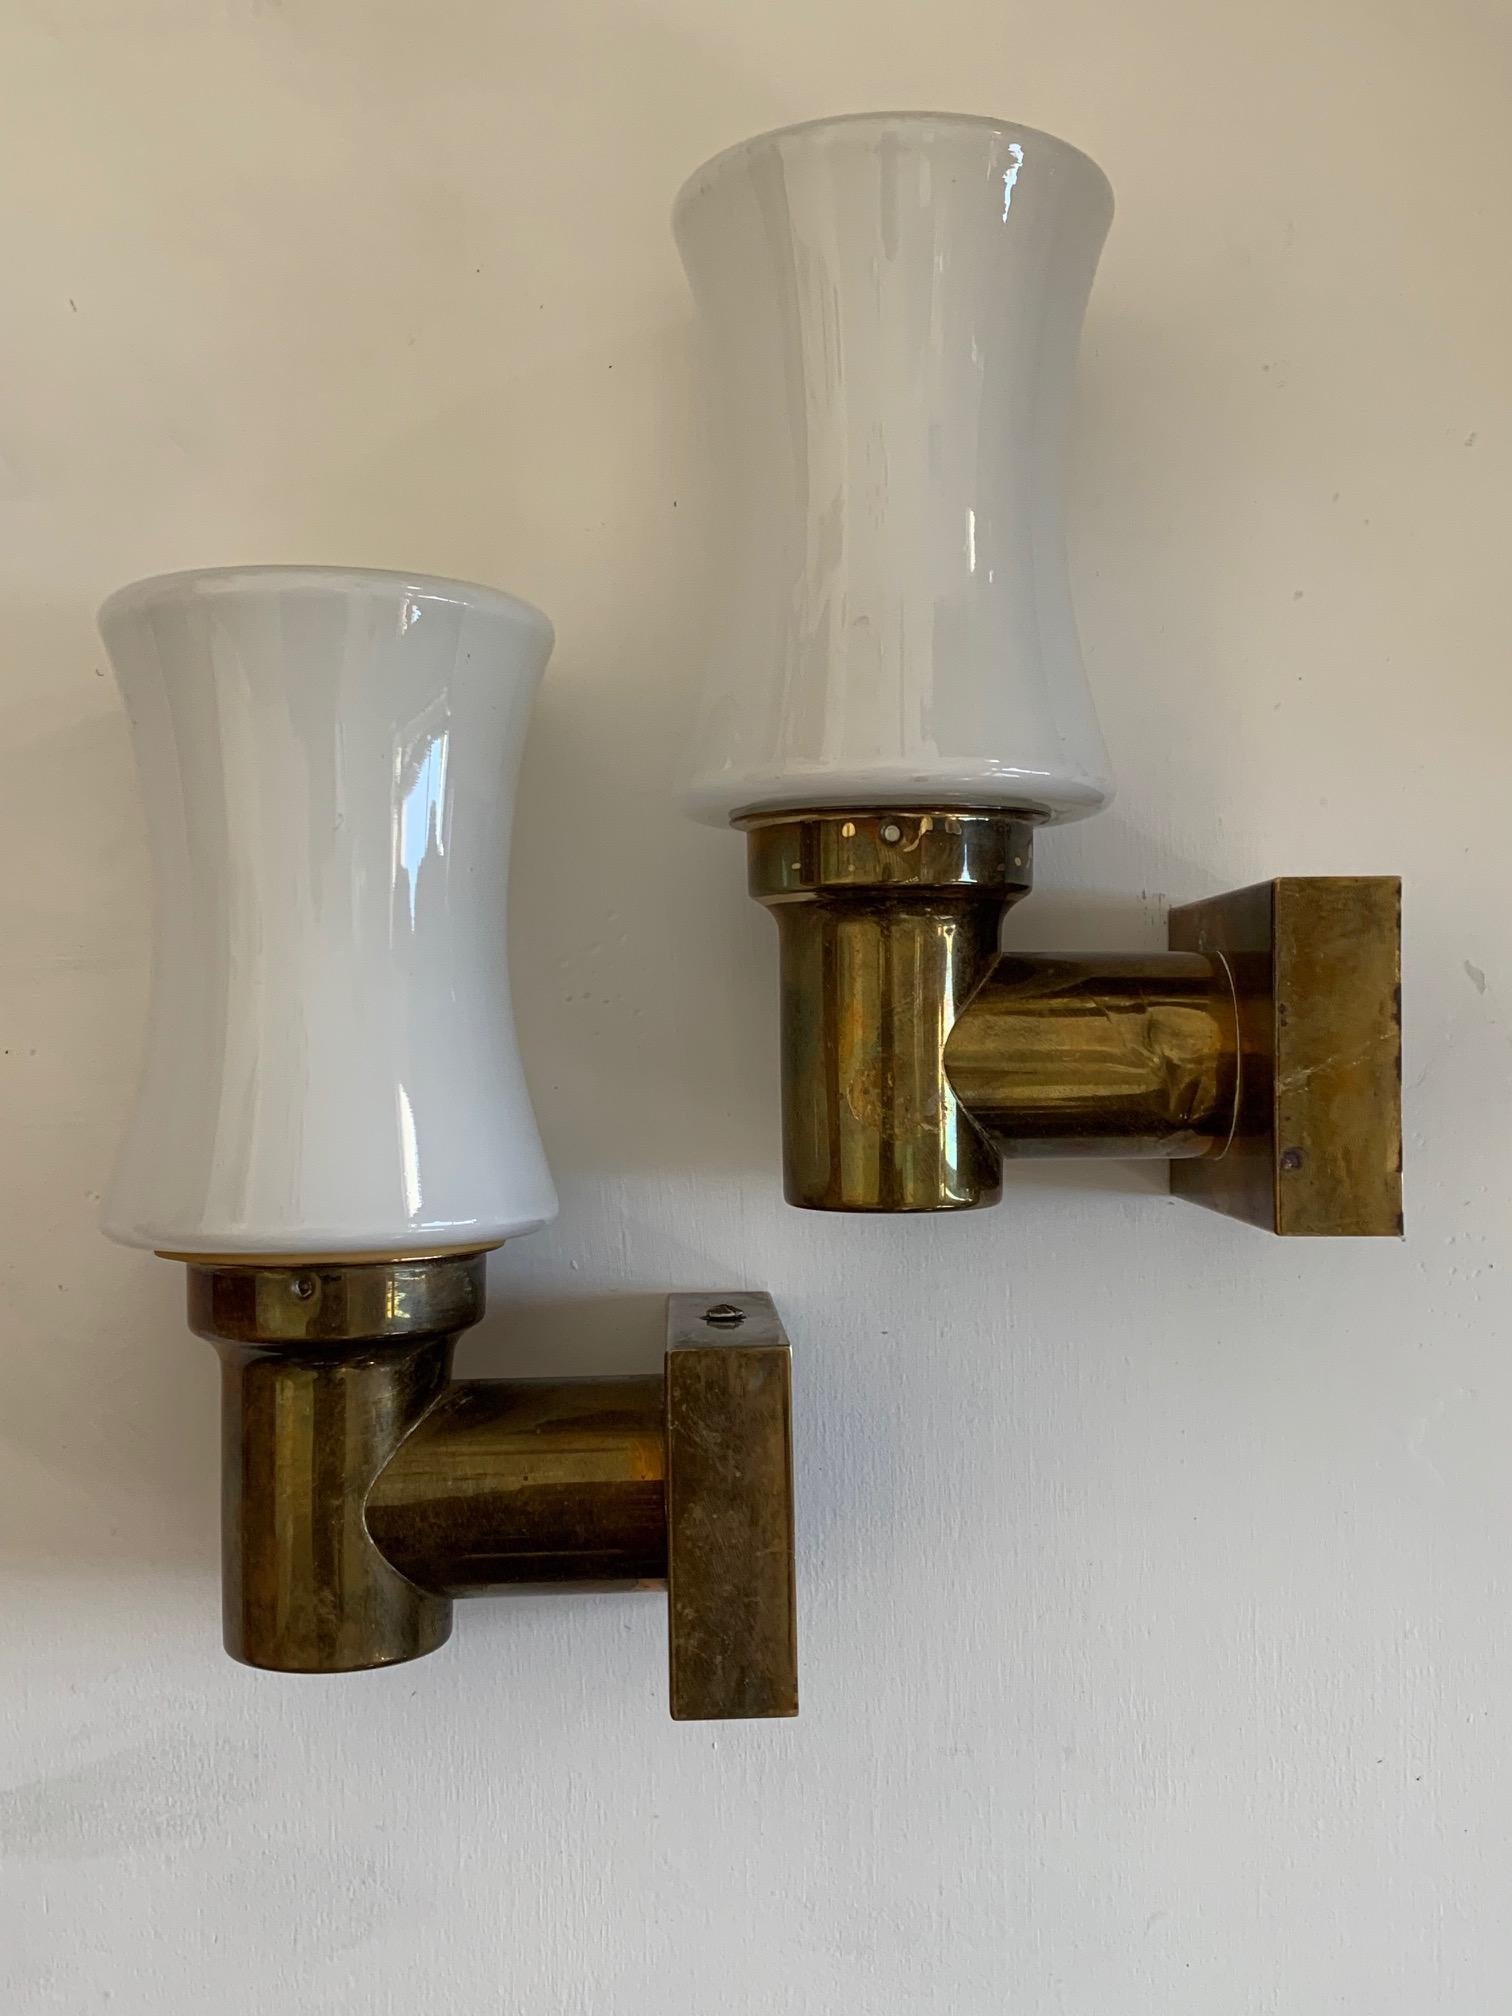 A pair of unusual sconces from Germany, circa 1950s. Brass and opaline glass, they can be hung up or down. Small scale, perfect as vanity/bathroom lights or anywhere in the room.